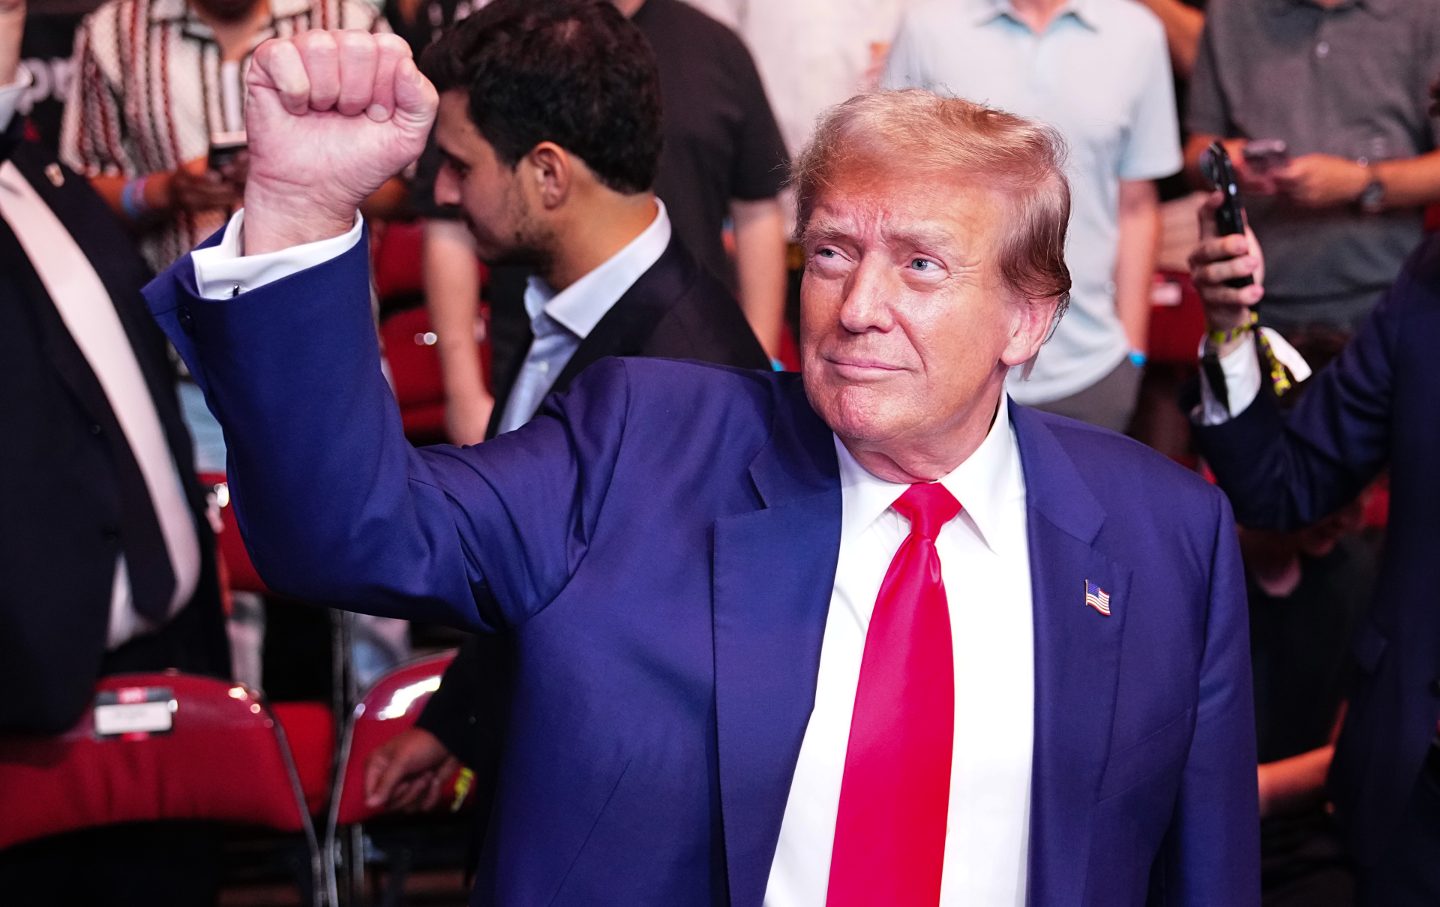 Donald Trump lifting his fist in front of a crowd.